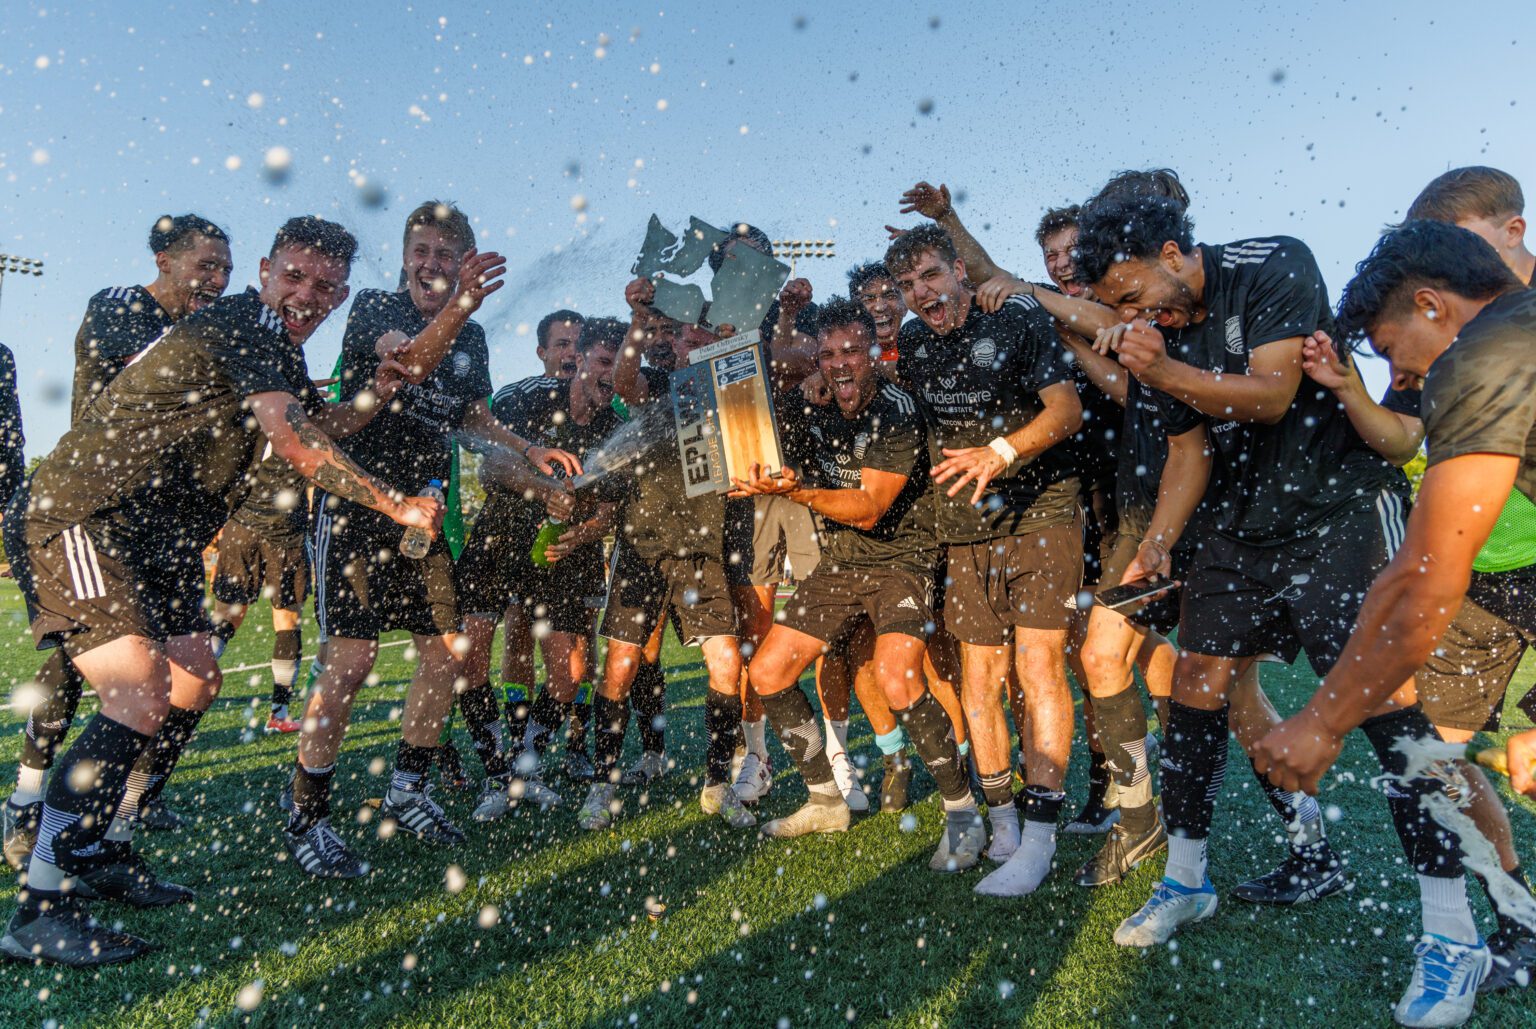 Players spray champagne as Bellingham United FC celebrates its 3-2 win over Washington Premier for the Evergreen Premier League championship at Orca Field on July 23.